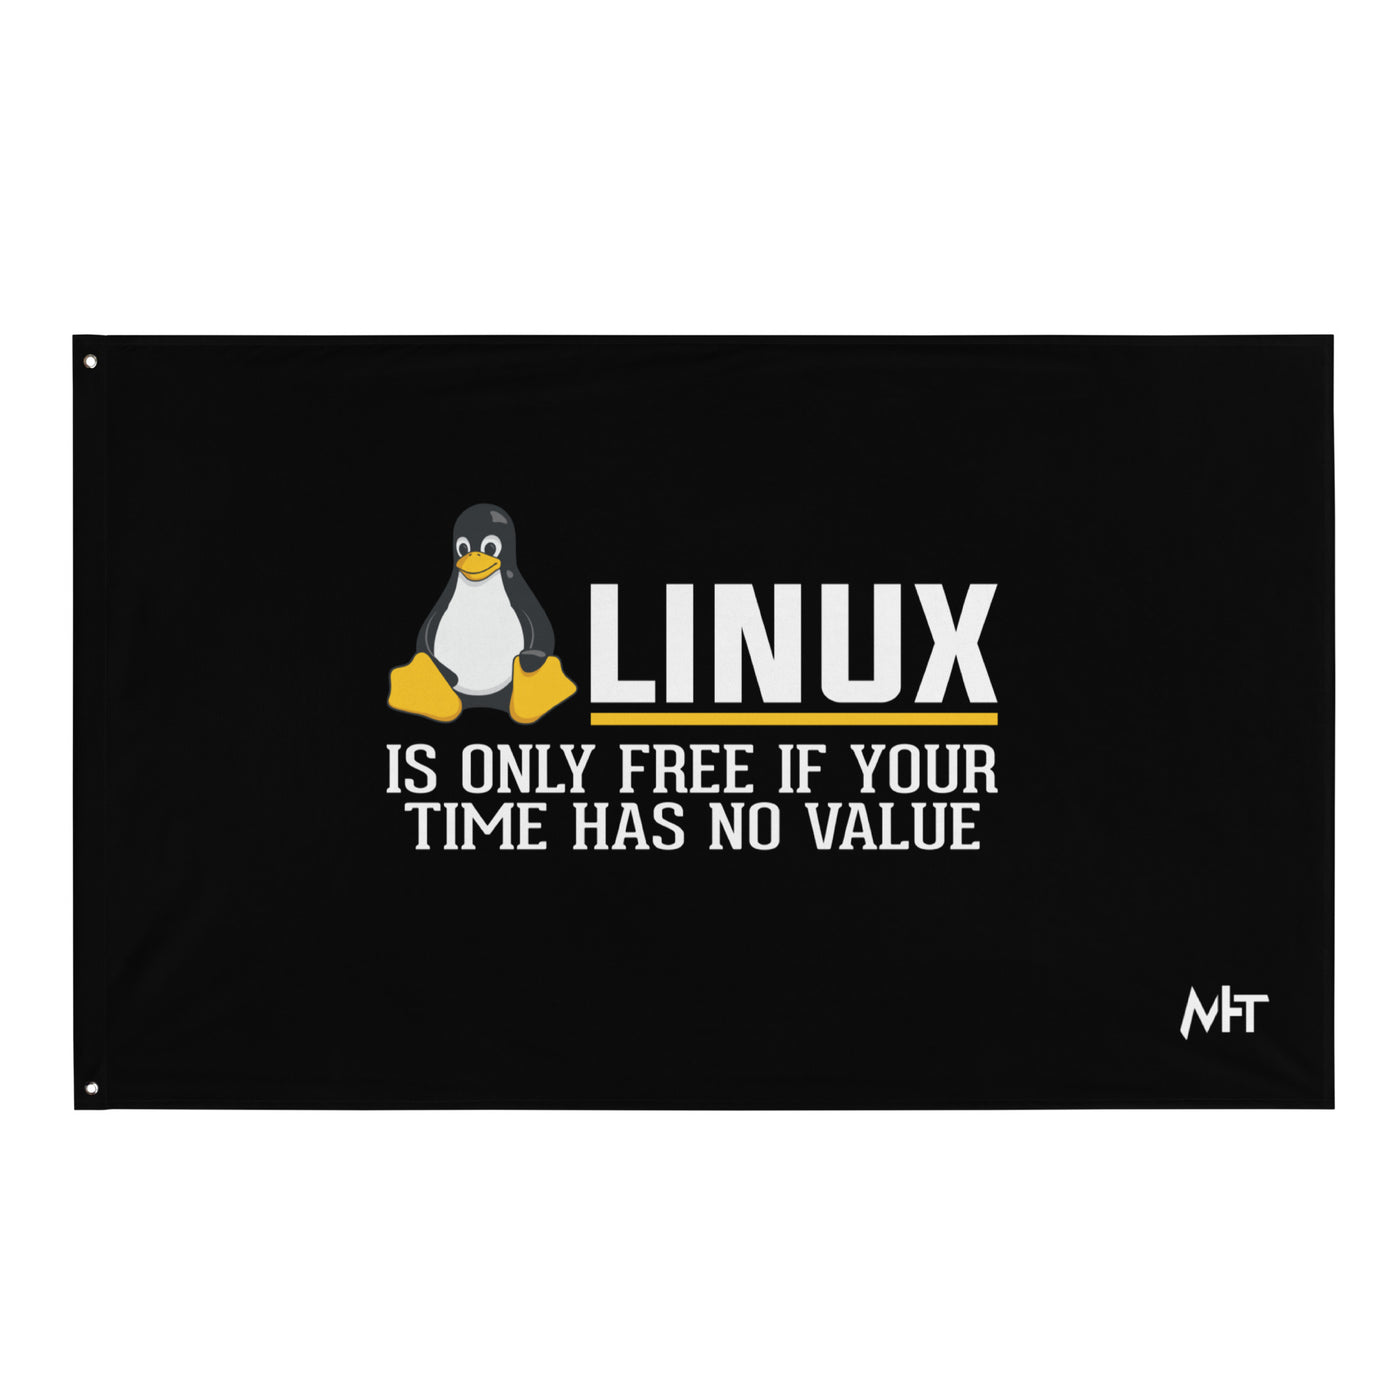 Linux is free only when your time has no value Flag